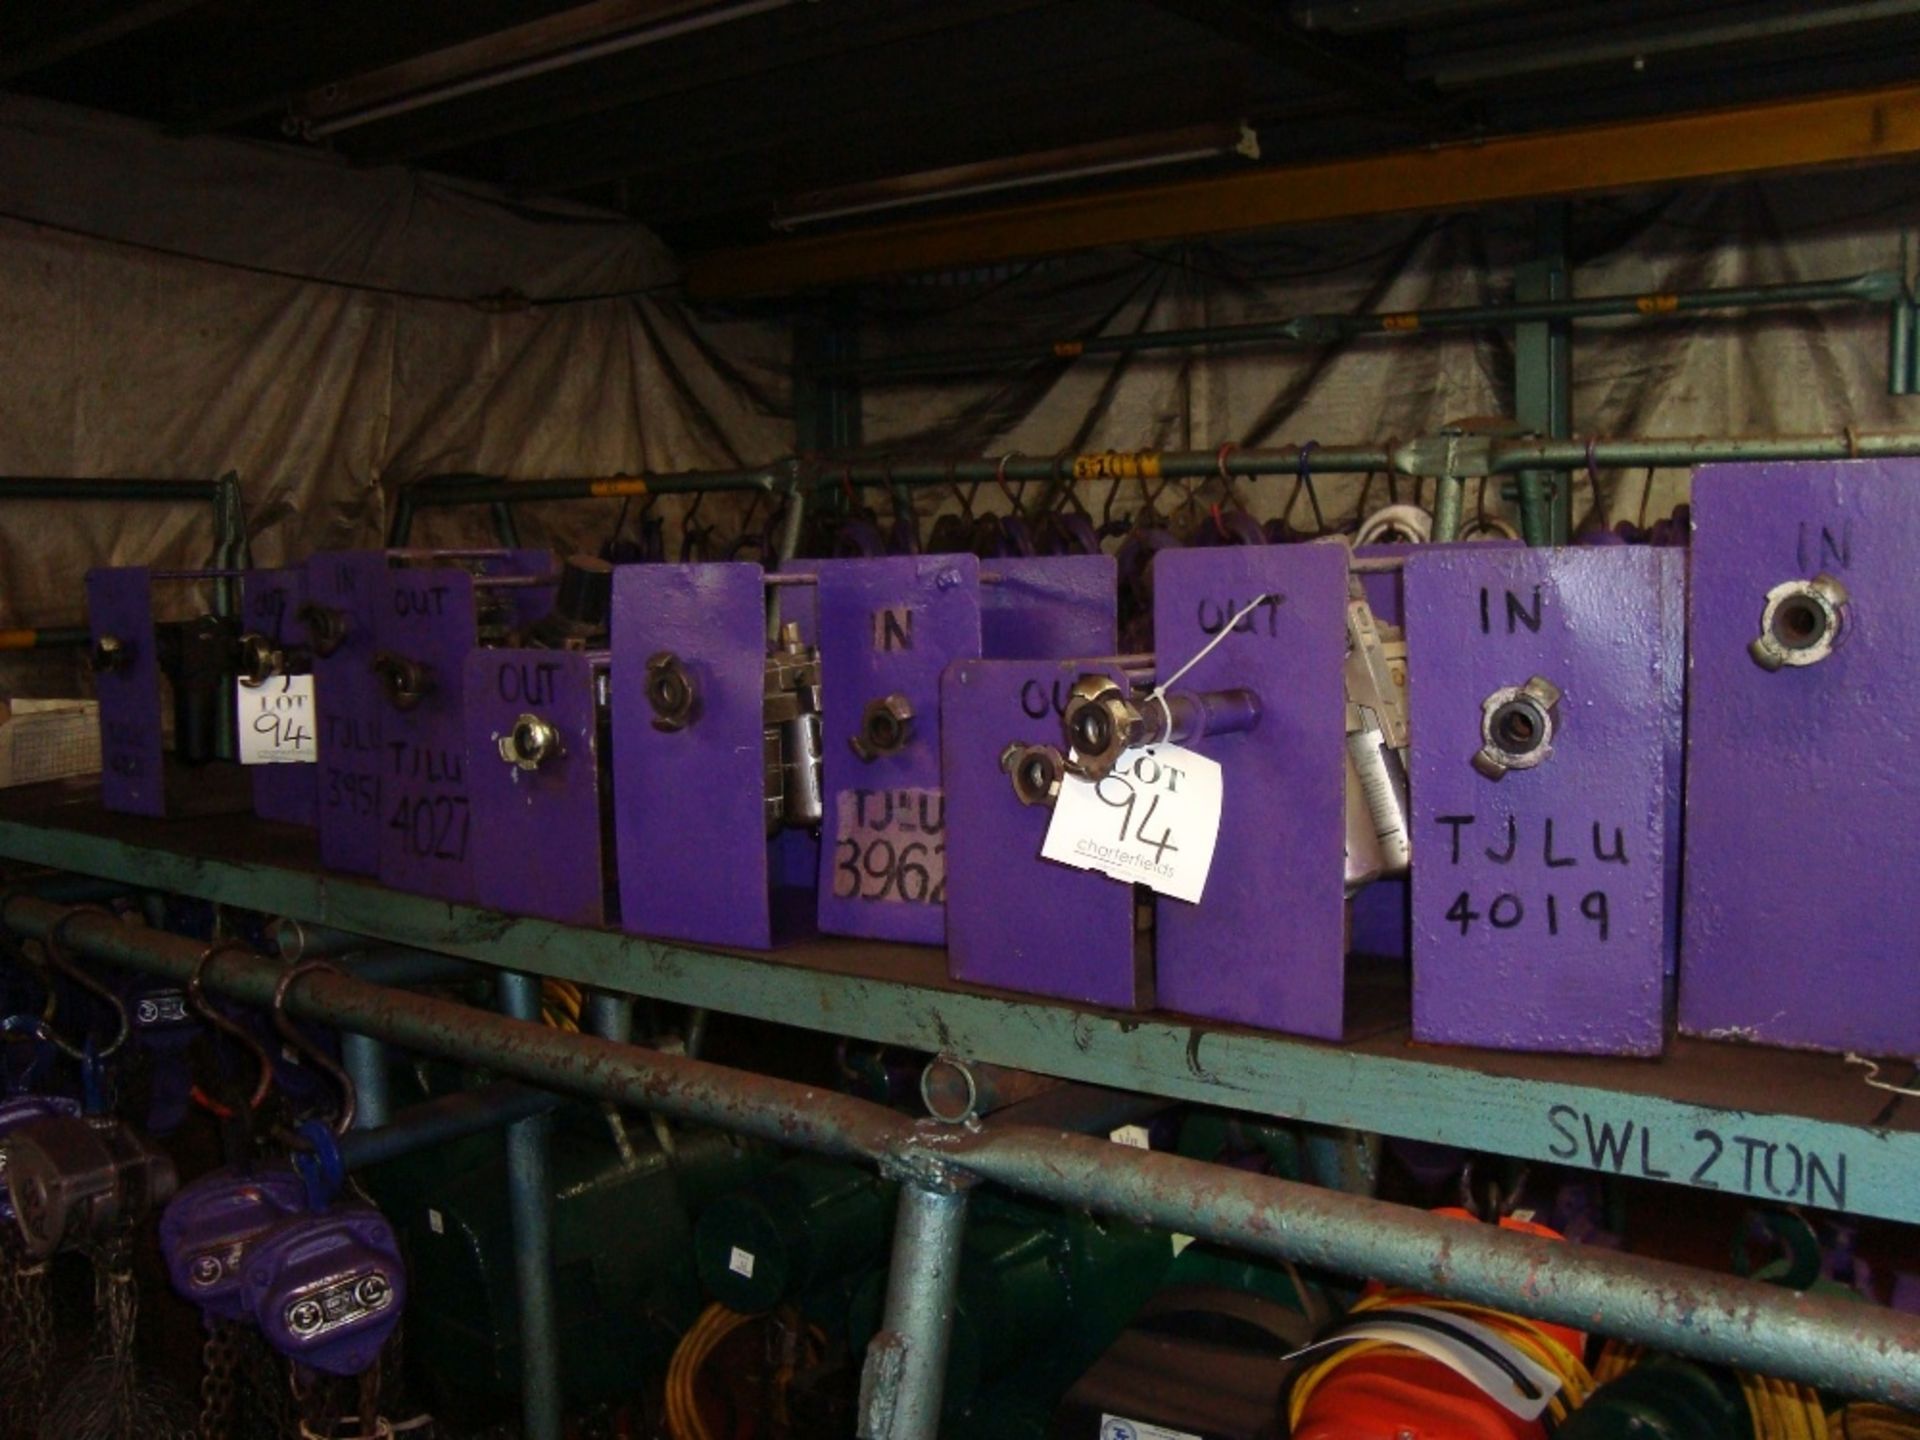 A quantity of approximately 13 in line pneumatic lubrication units